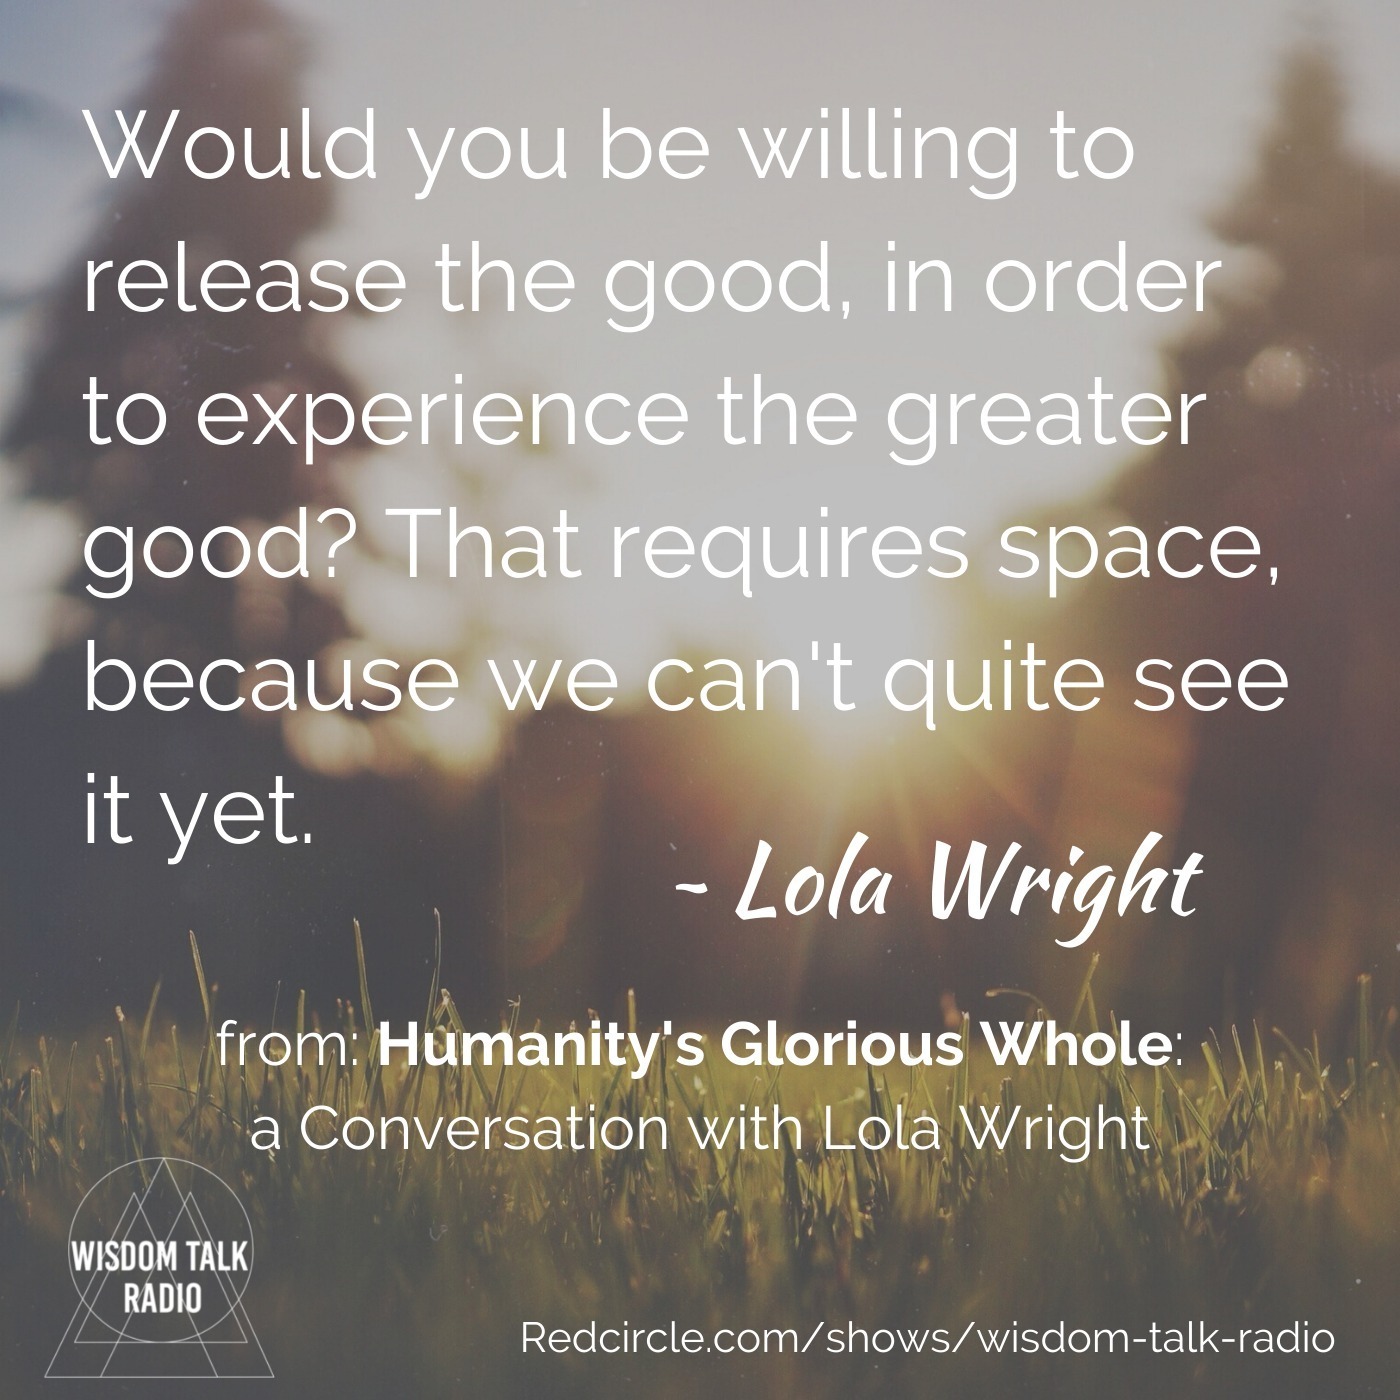 Humanity’s Glorious Whole: a conversation with Lola Wright